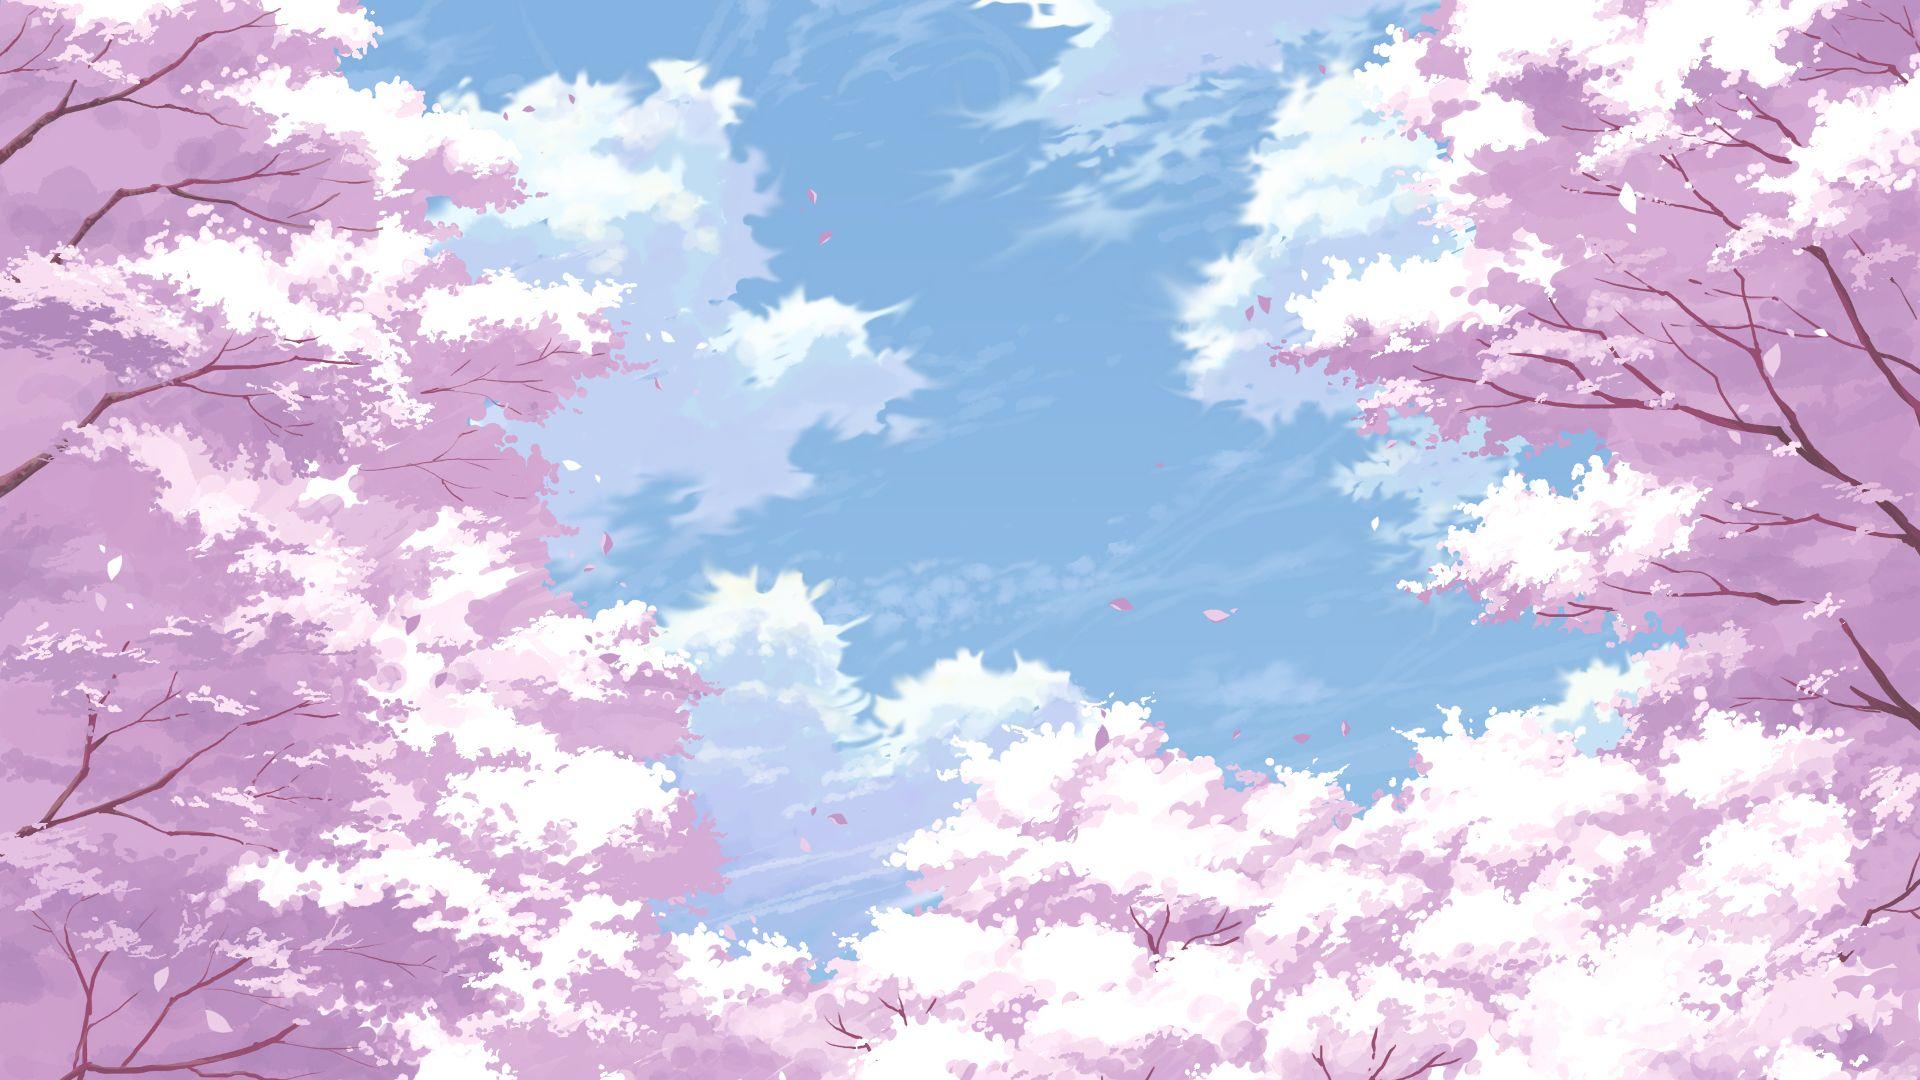 Cherry blossom anime wallpapers